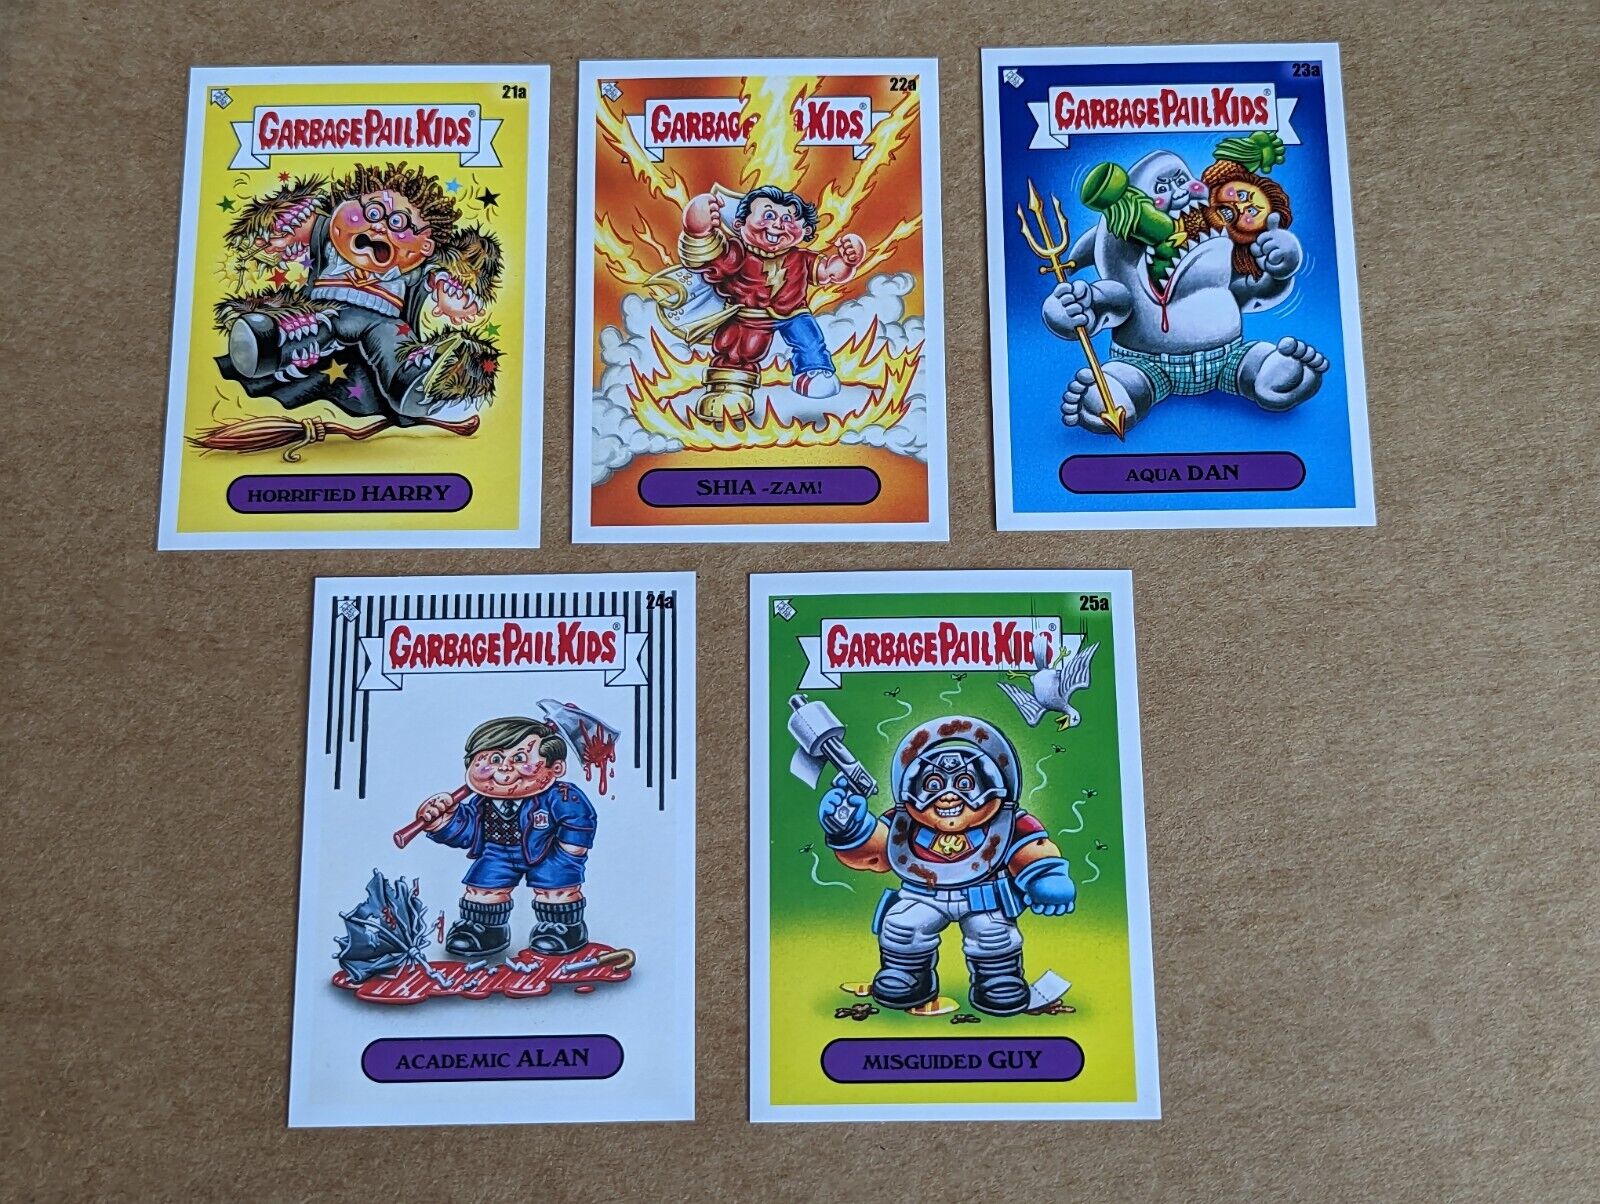 Garbage Pail Kids Book Worms Gross Adaptations Walmart Toy Aisle Set #\'s 21a-25a